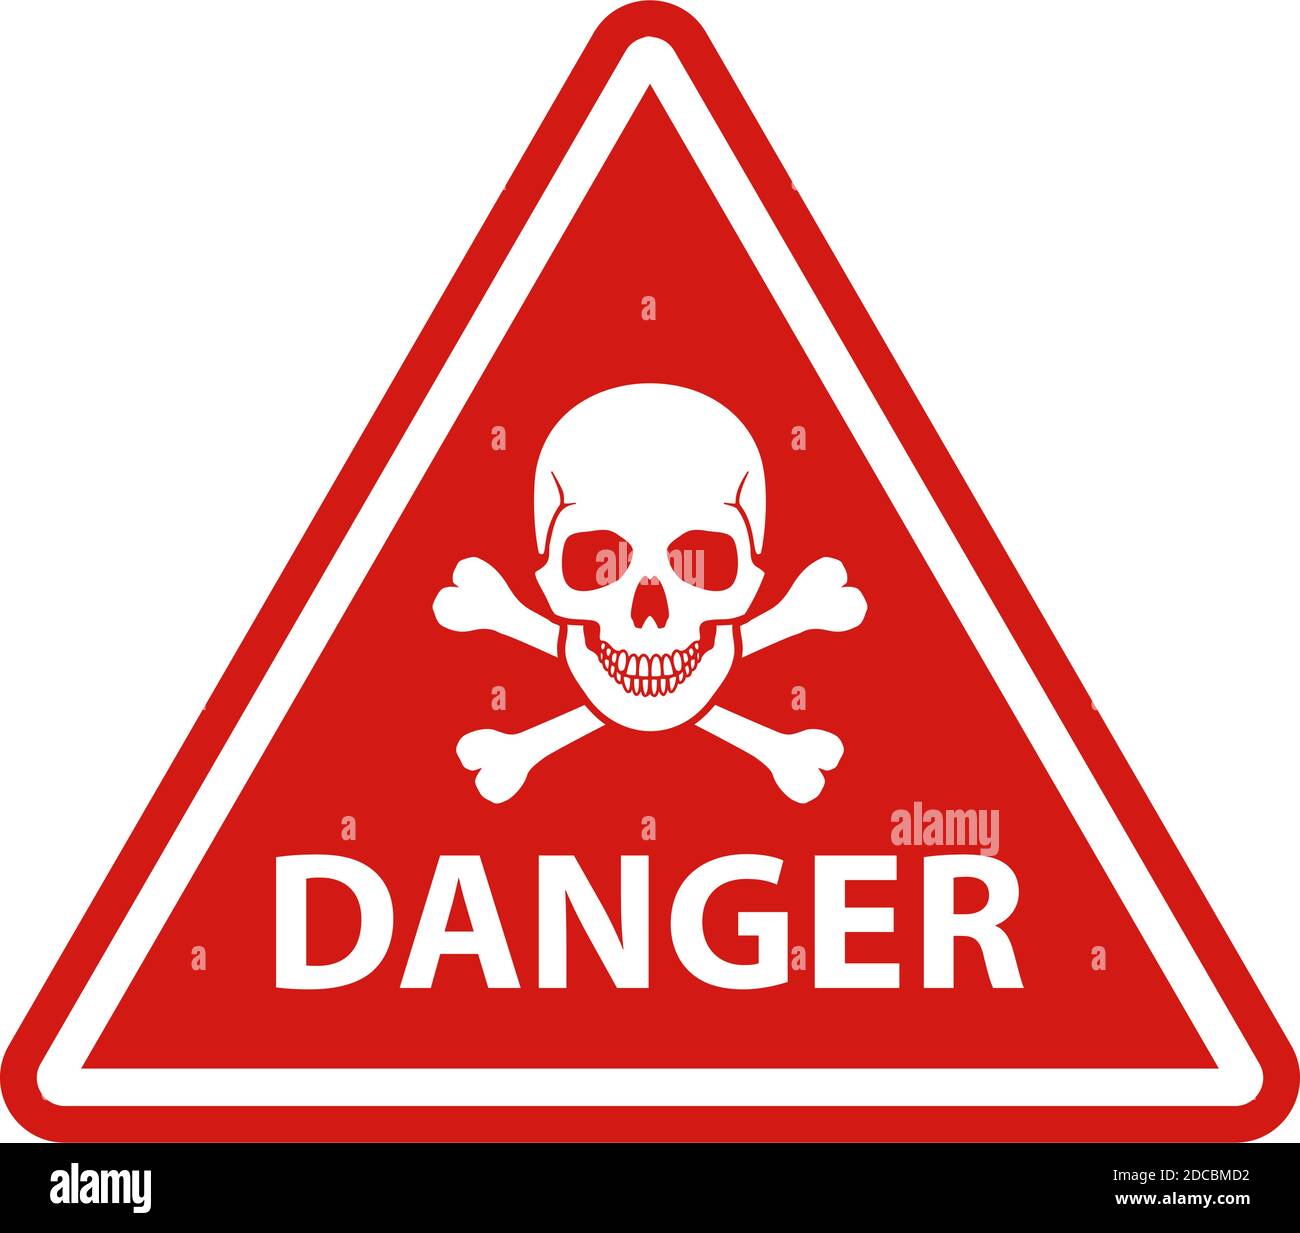 Red danger road sign with skull and crossbones with white frame warning symbol vector illustration Stock Vector